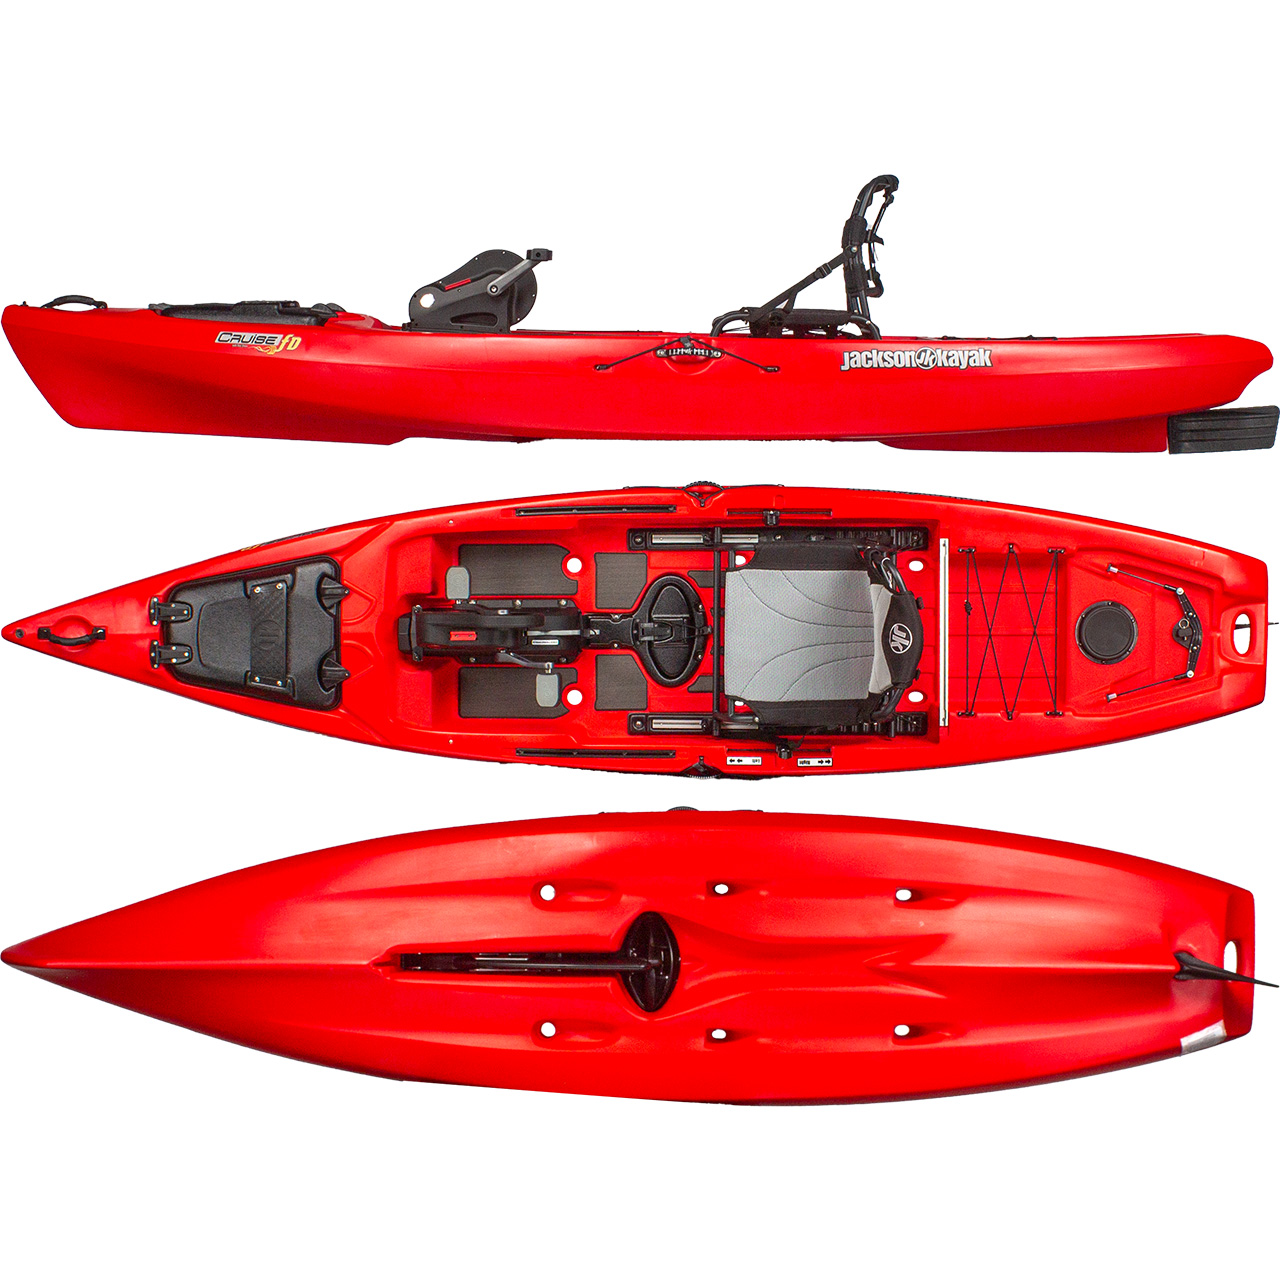 Paddling Equipment - Kayaks, Canoes, Rafts, Paddleboards & Gear [Paddling  Buyer's Guide]